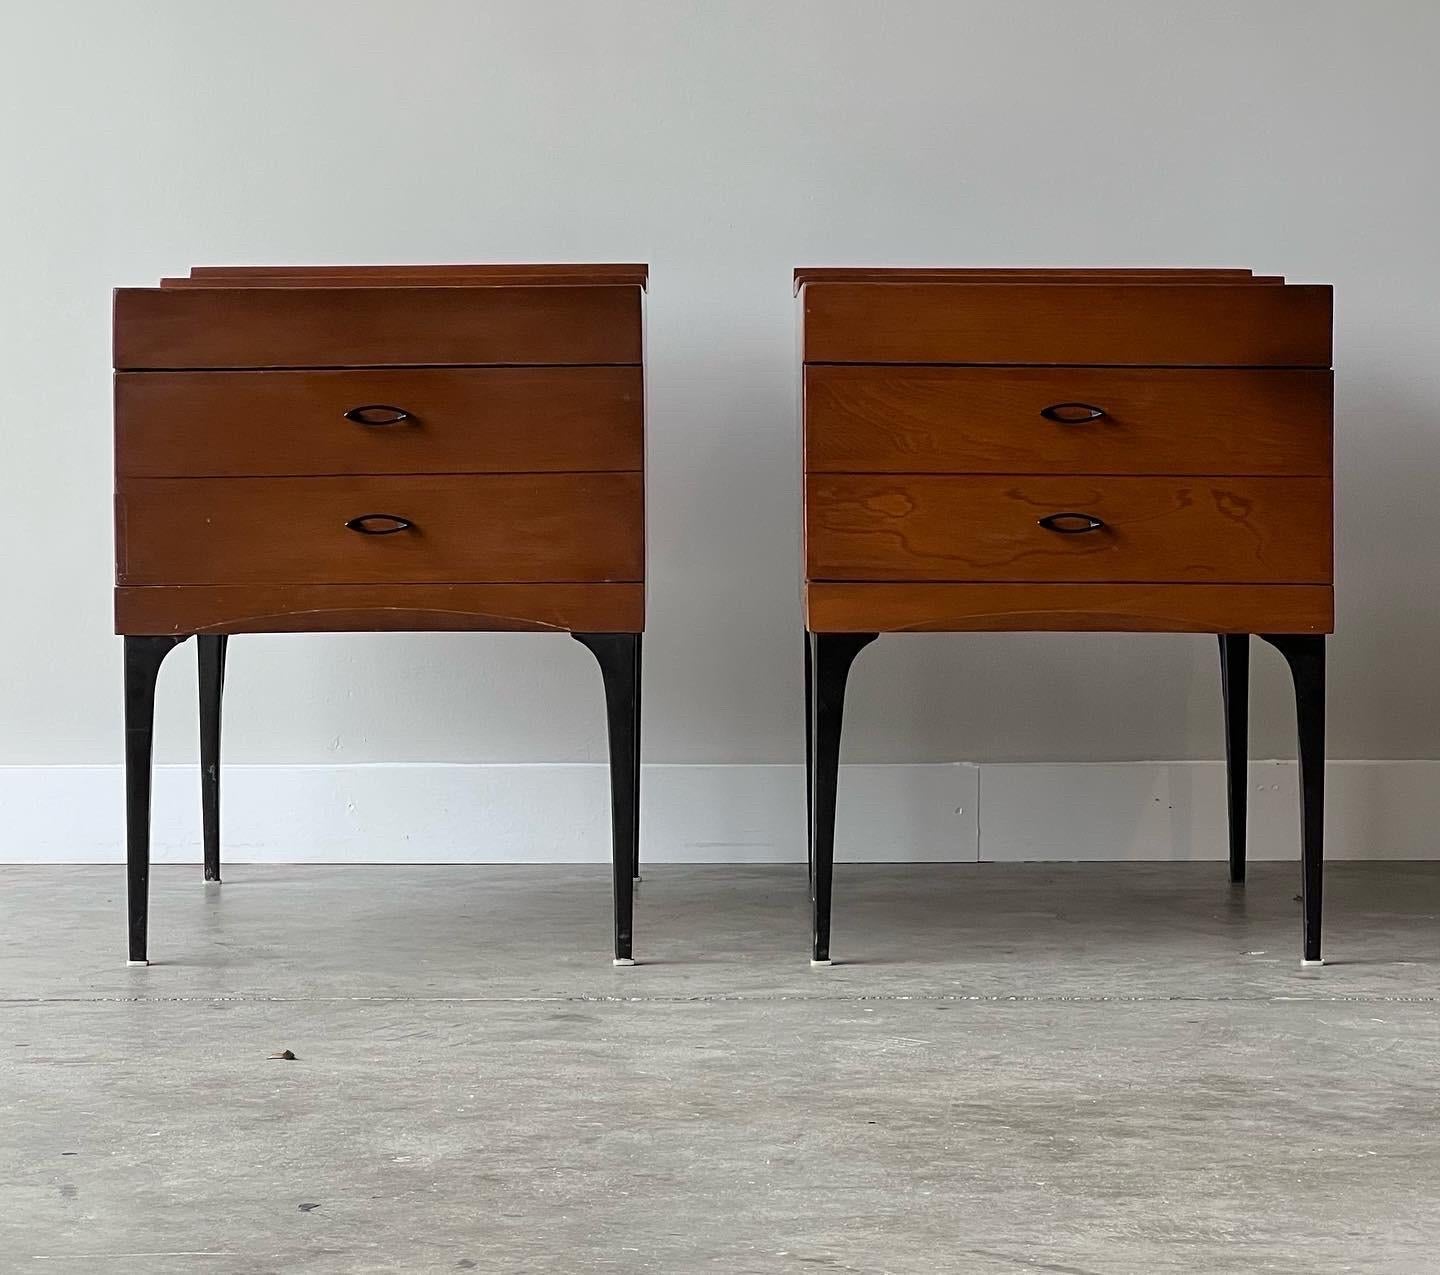 Outstanding seldomly seen pair of rare mid century modern Heywood Wakefield Contessa line nightstands. Top tray slides back and forth covering and allowing open or covered top. The steel black tapered thin legs are just phenomenal. Oval shaped metal